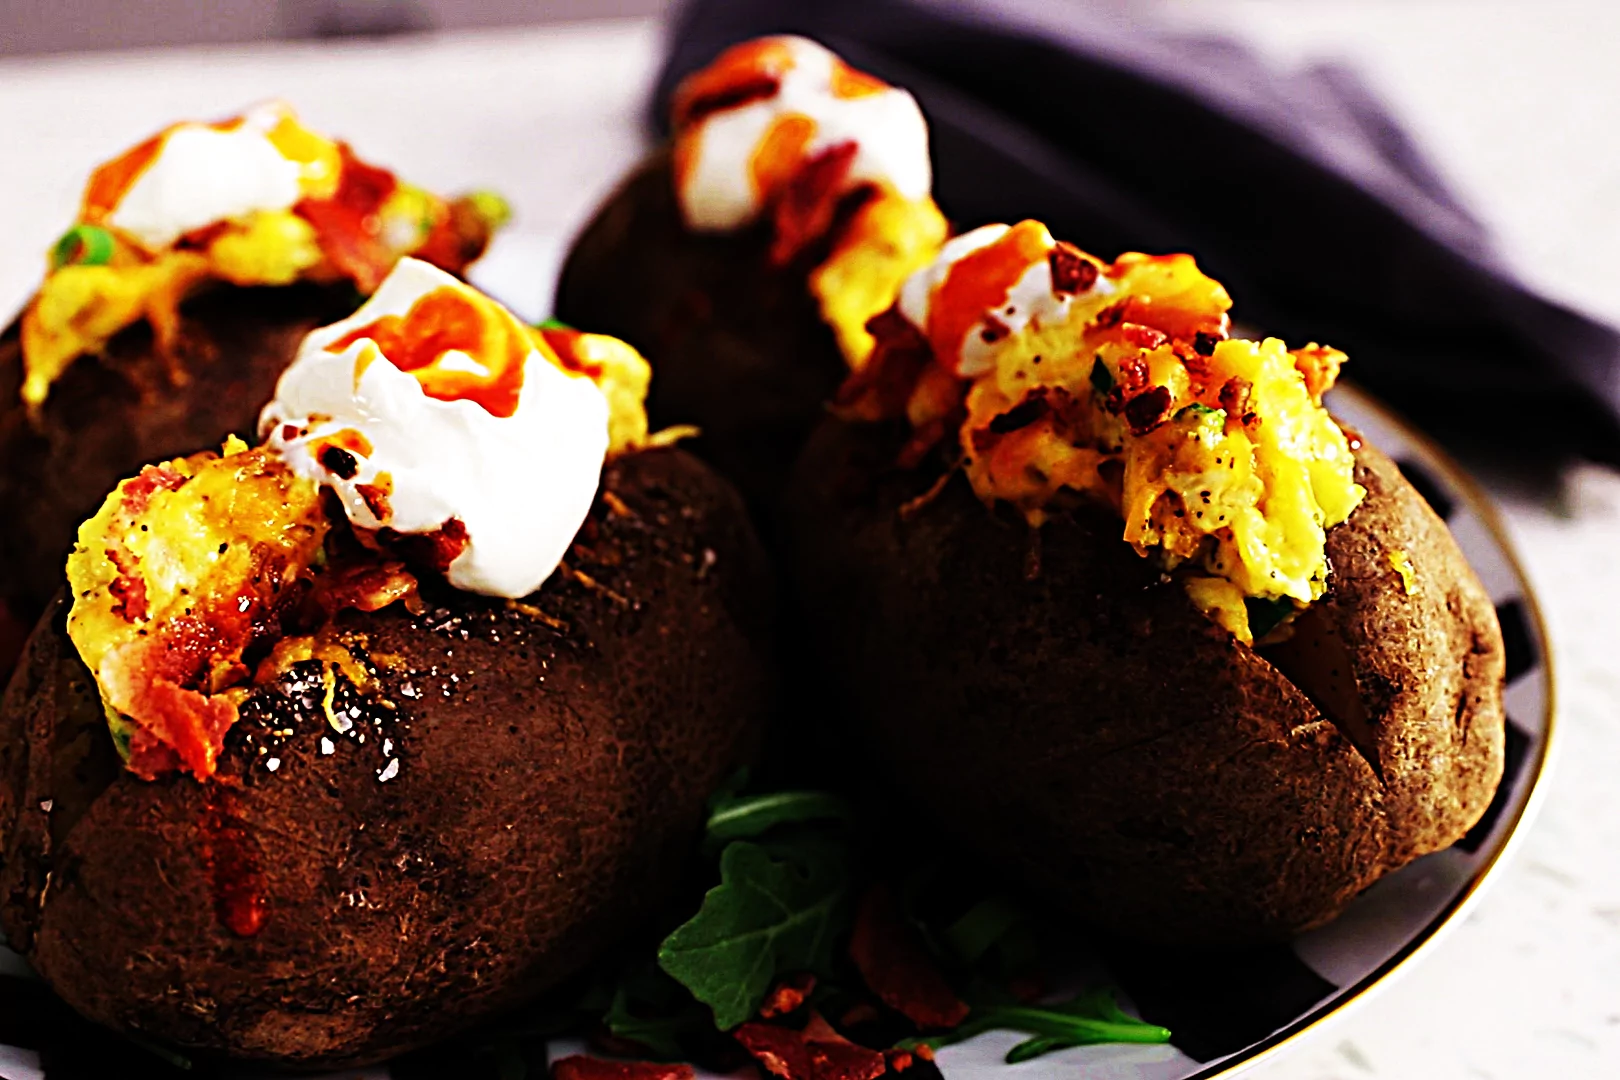 Stupid-Easy Recipe for Loaded Breakfast Baked Potatoes (#1 Top-Rated)